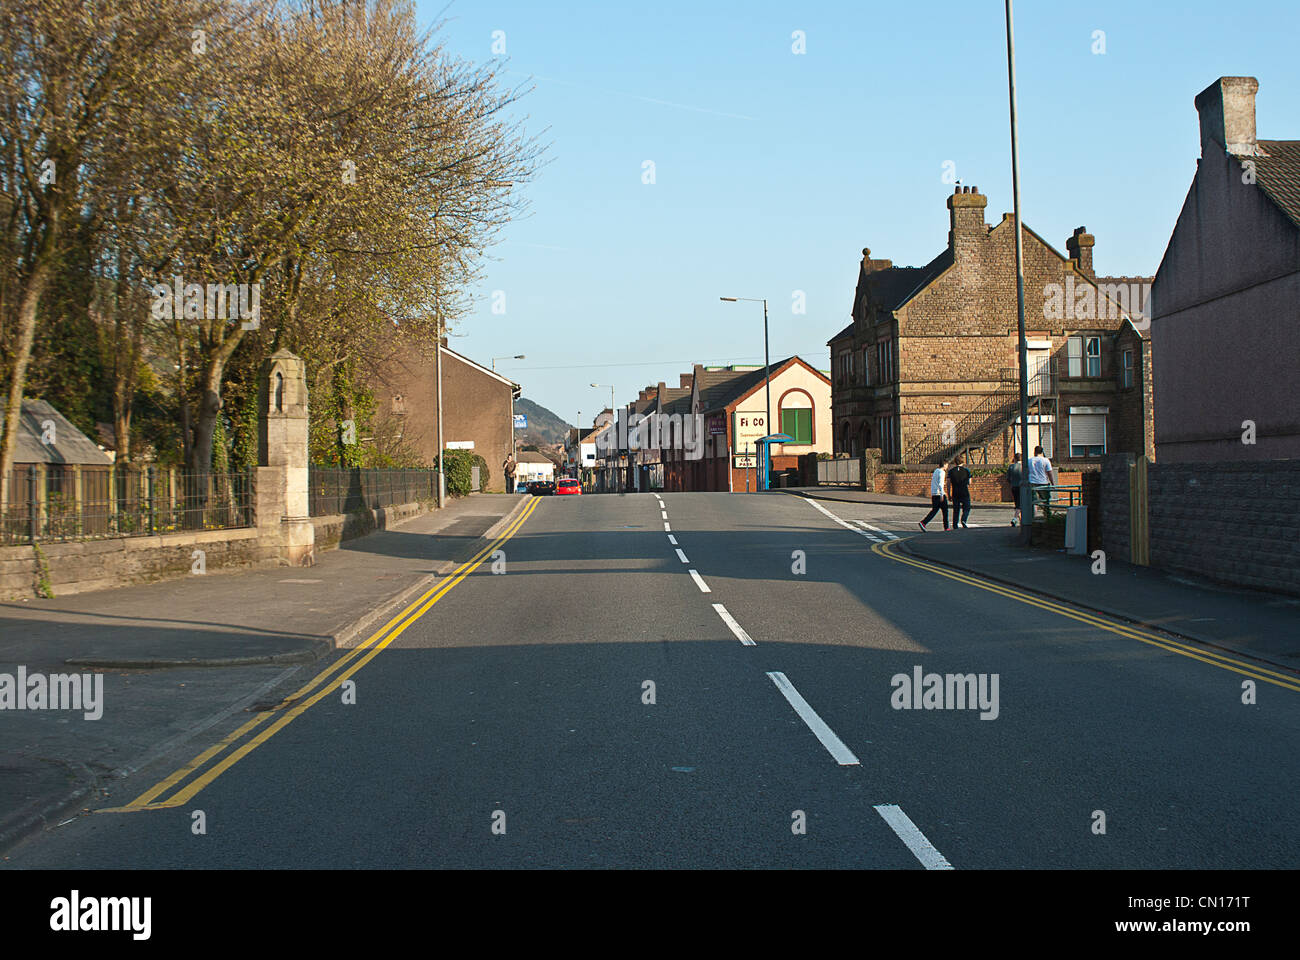 Urban street scene from middle of the road showing houses cars and shops and people walking in the distance Stock Photo